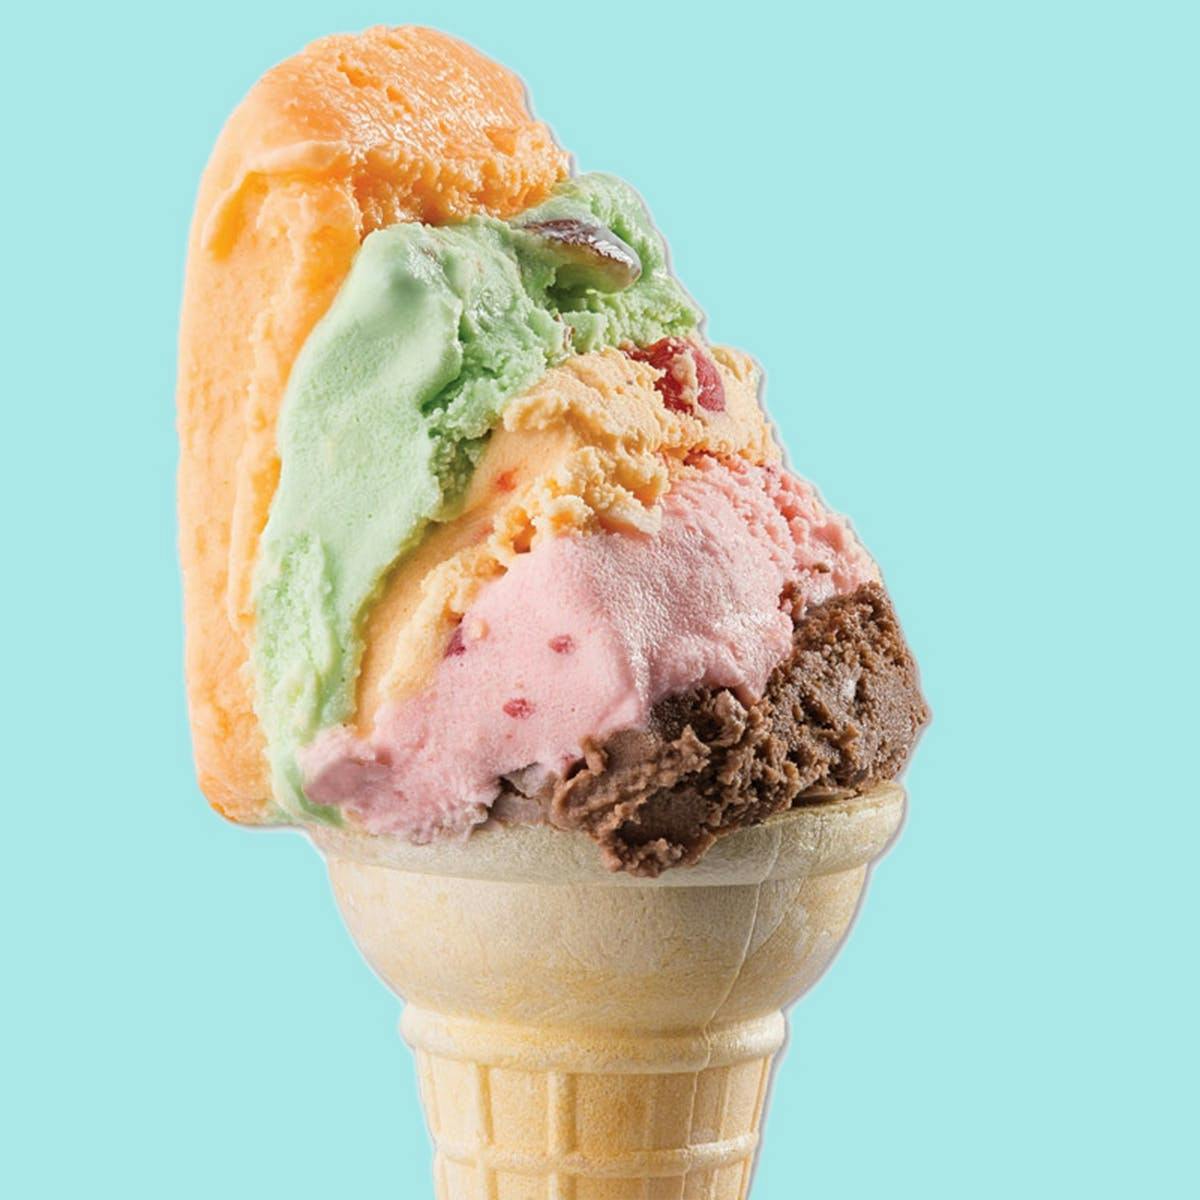 Rainbow Cone, Chicago's Nearly 100-Year-Old Ice Cream Parlor, Opens A New  Location - Eater Chicago